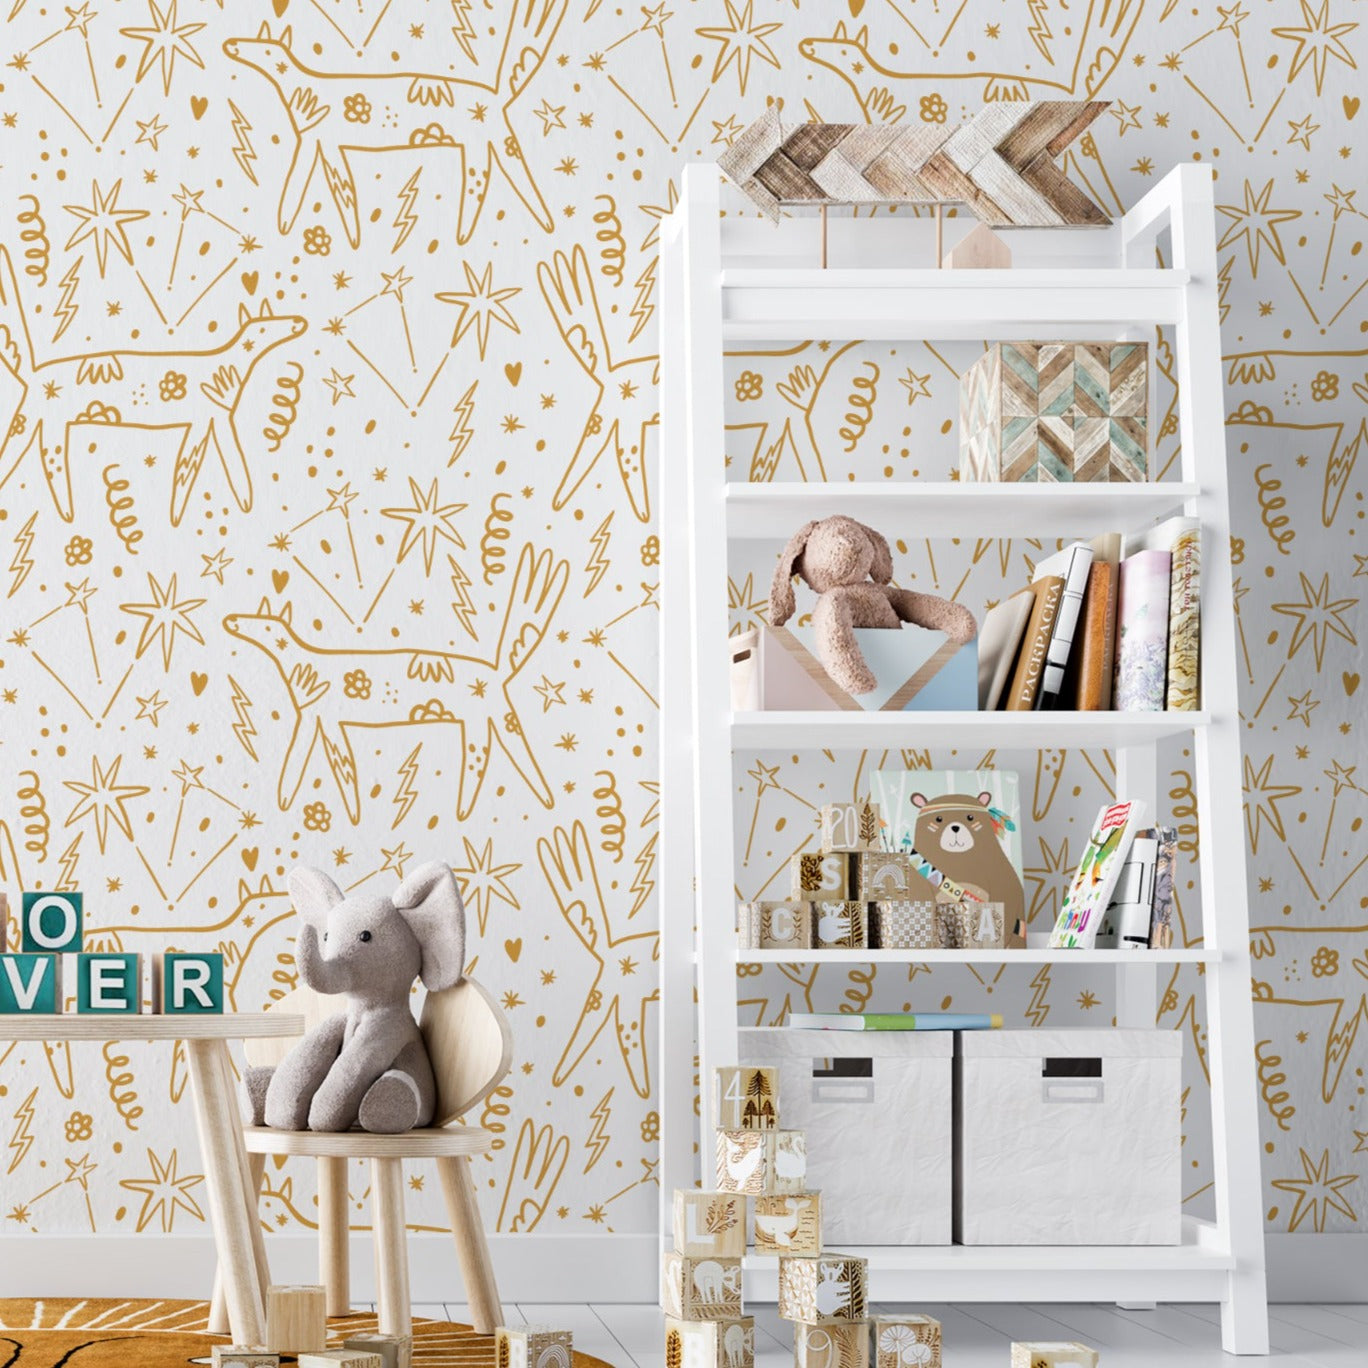 A cozy corner of a child's room enhanced by 'Dog Wallpaper 34,' which showcases golden abstract dog designs and stars on a white background, adding a magical and imaginative feel to the space.